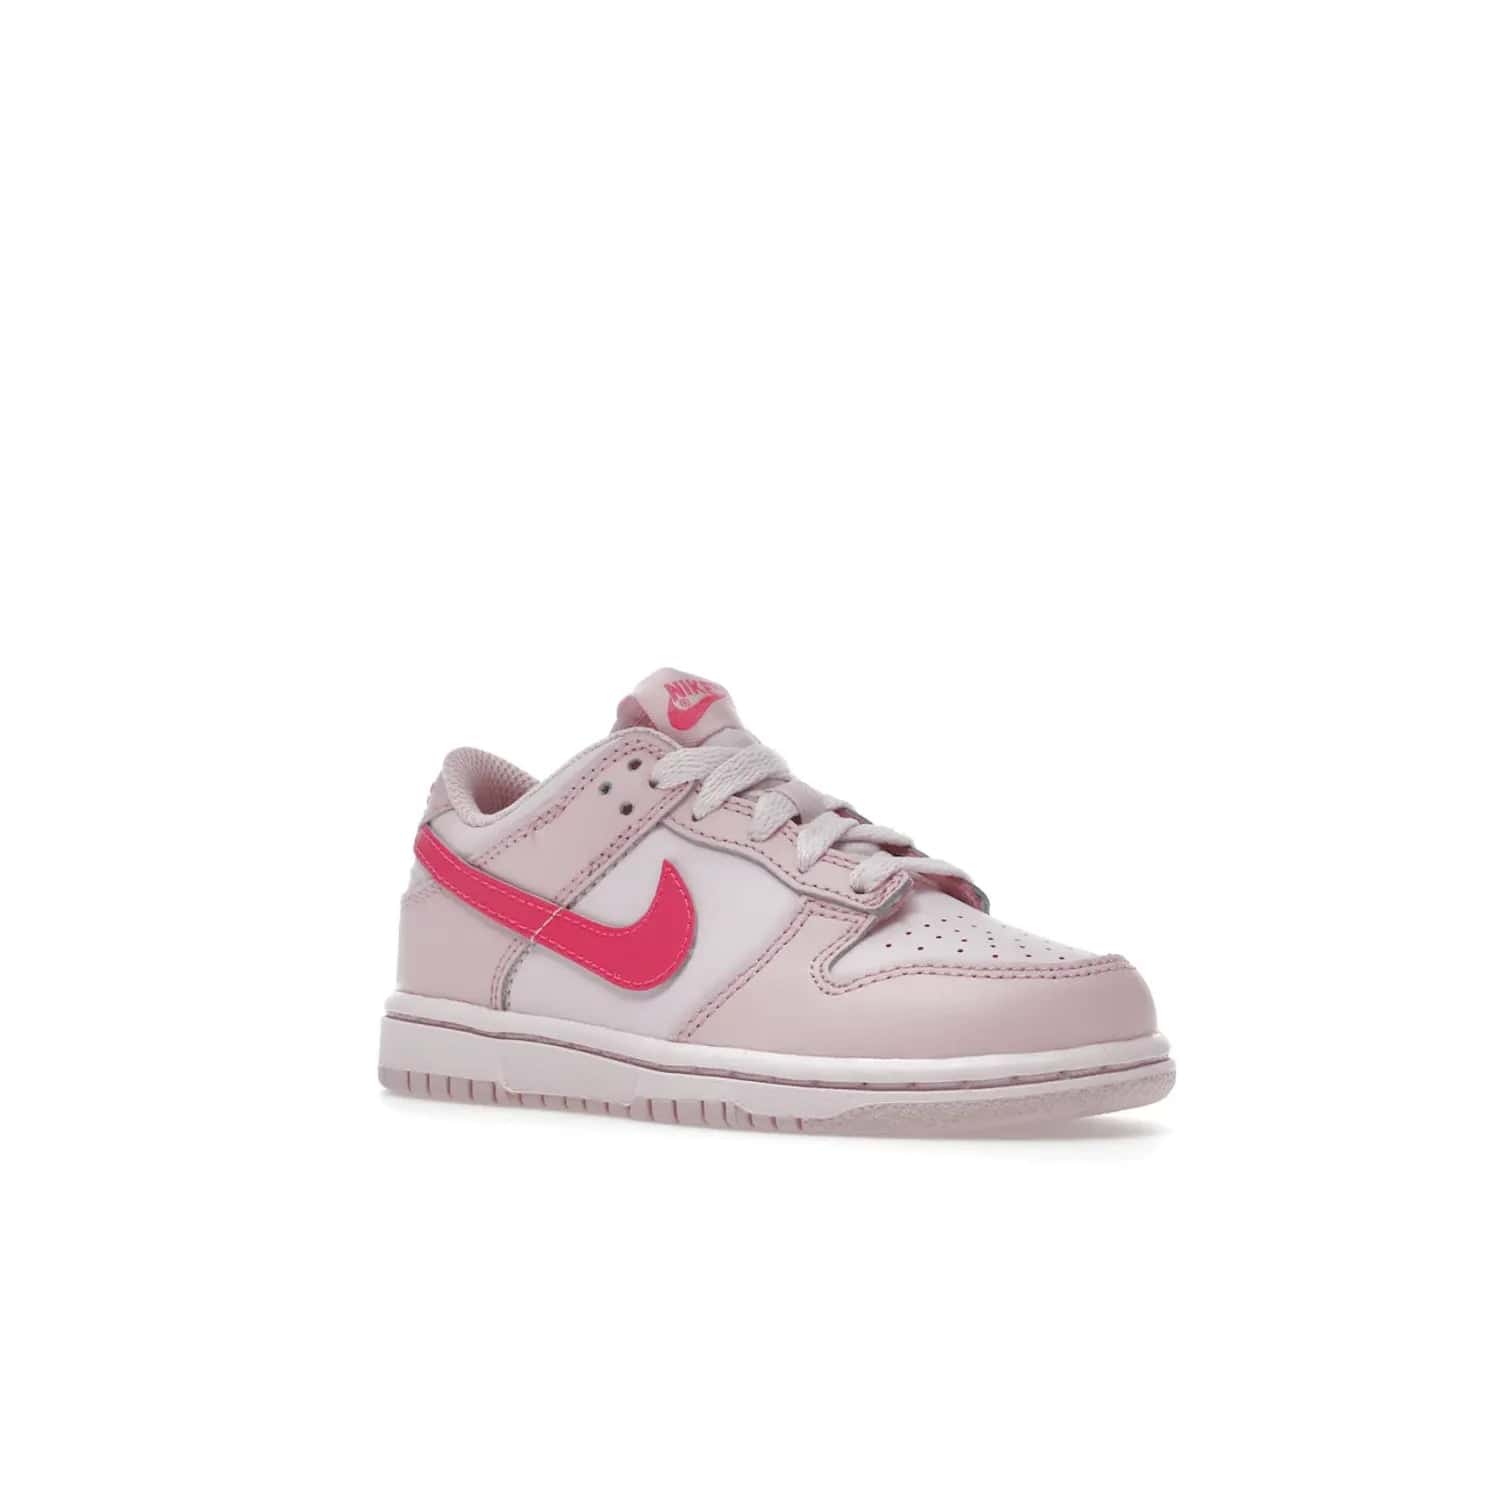 Nike Dunk Low Triple Pink (PS) - Image 5 - Only at www.BallersClubKickz.com - A stunning shoe option for completing any look: Nike Dunk Low Triple Pink (Preschool). Light pink layered leather upper with darker pink synthetic accents. Plus toe box of perforated pink leather and Nike symbol embroidered pull tab. Rubber midsole and outsole. Affordable price of $85.